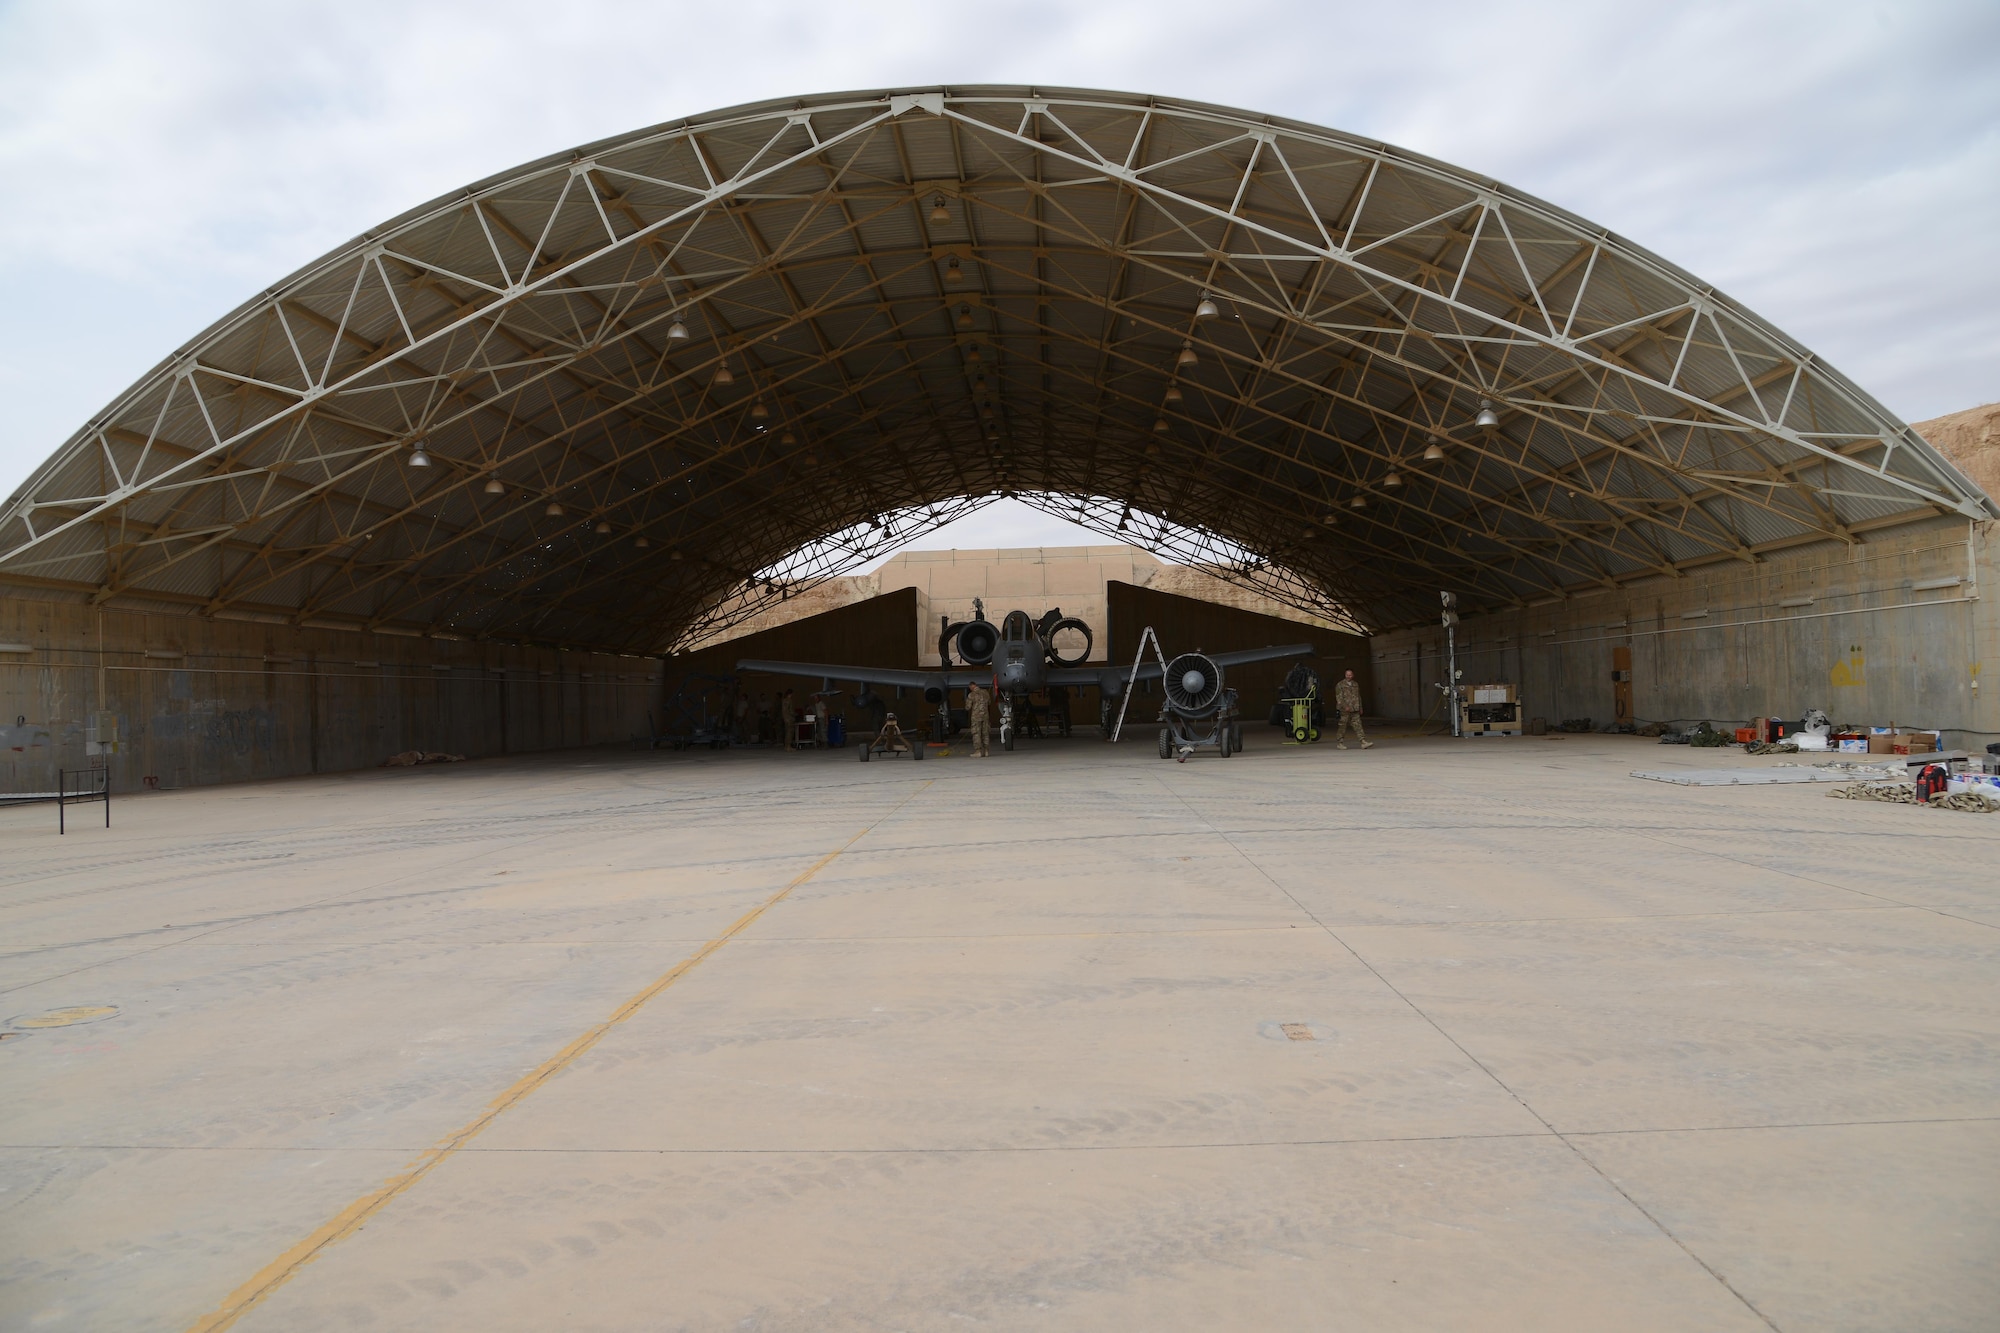 Airmen from the 332nd Expeditionary Maintenance Squadron work in an abandoned aircraft shelter at Al Asad Air Base, Iraq, to repair an A-10C Thunderbolt II that suffered catastrophic engine failure. A maintenance response team from the 332nd EMXG repaired the jet and got it back in the air – a task that could have taken more than a month – in less than five days. (U.S. Air Force photo/Tech. Sgt. Jared Marquis)